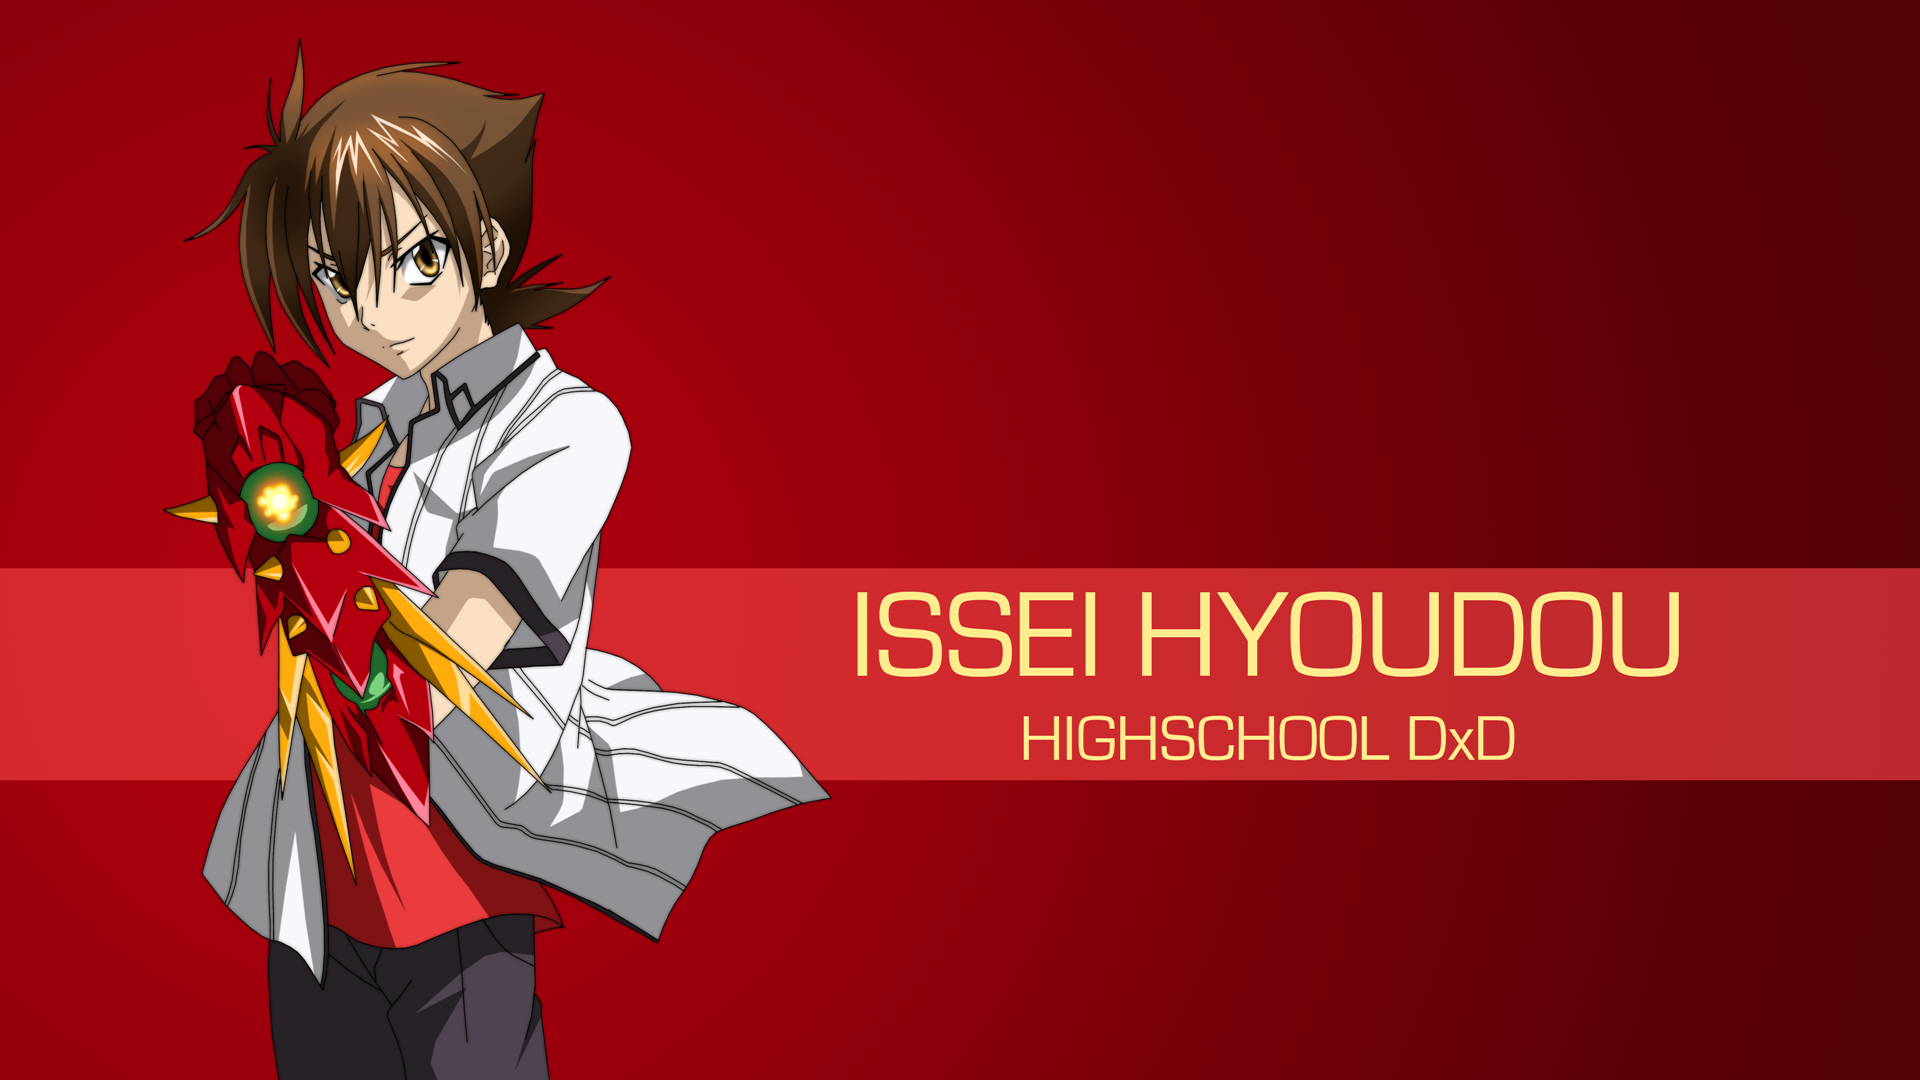 Anime 1920x1080 High School DxD Hyoudou Issei red background anime